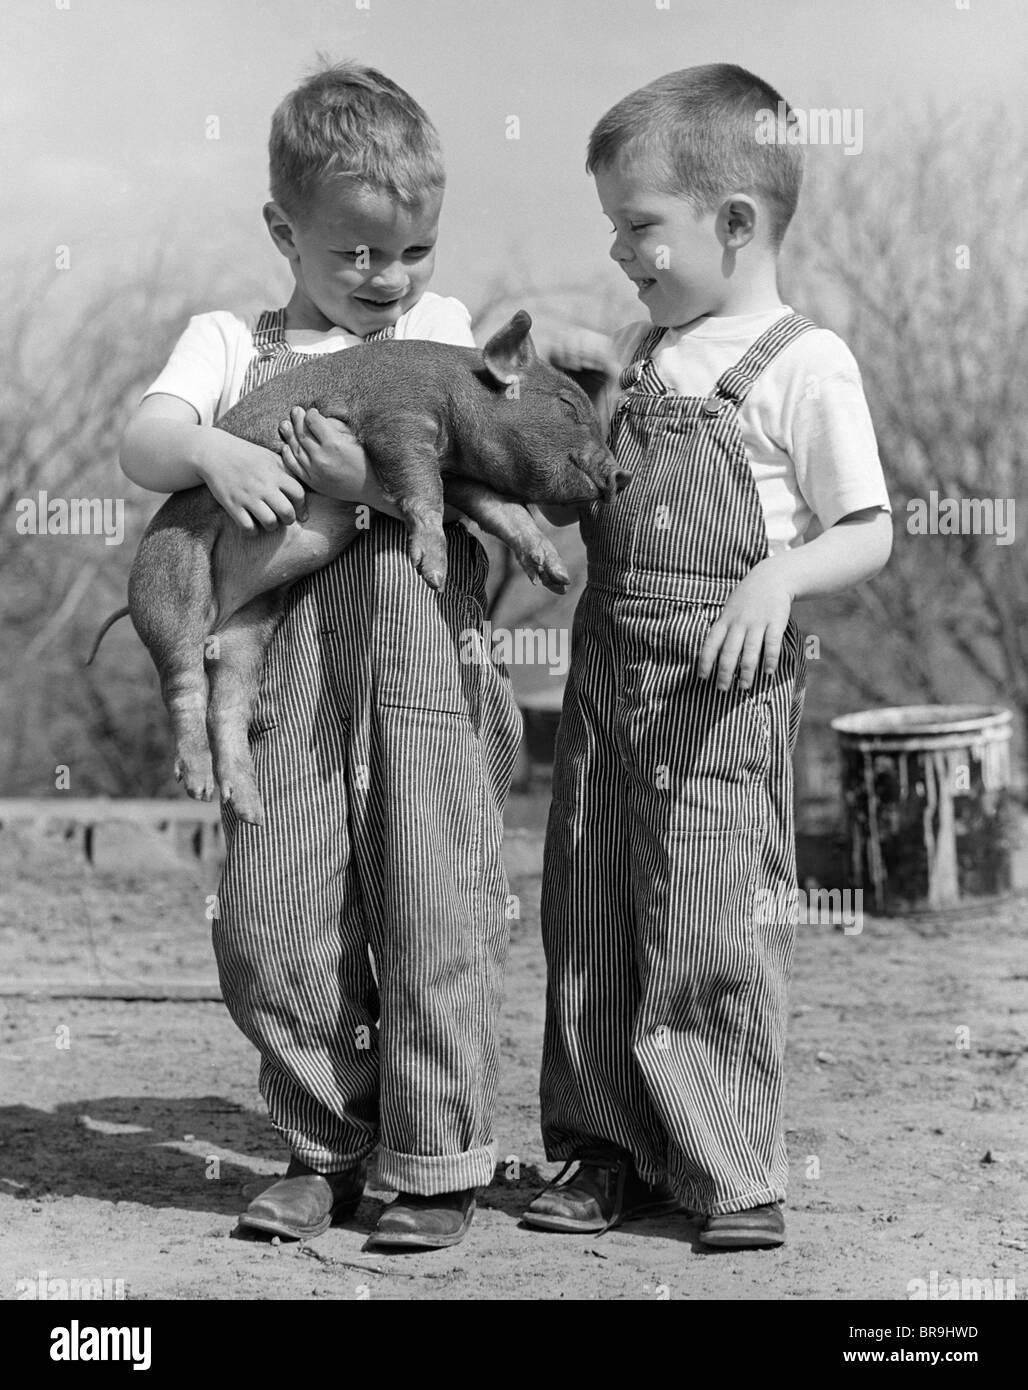 1950s BOYS IN STRIPED OVERALLS HOLDING PIGLET Stock Photo